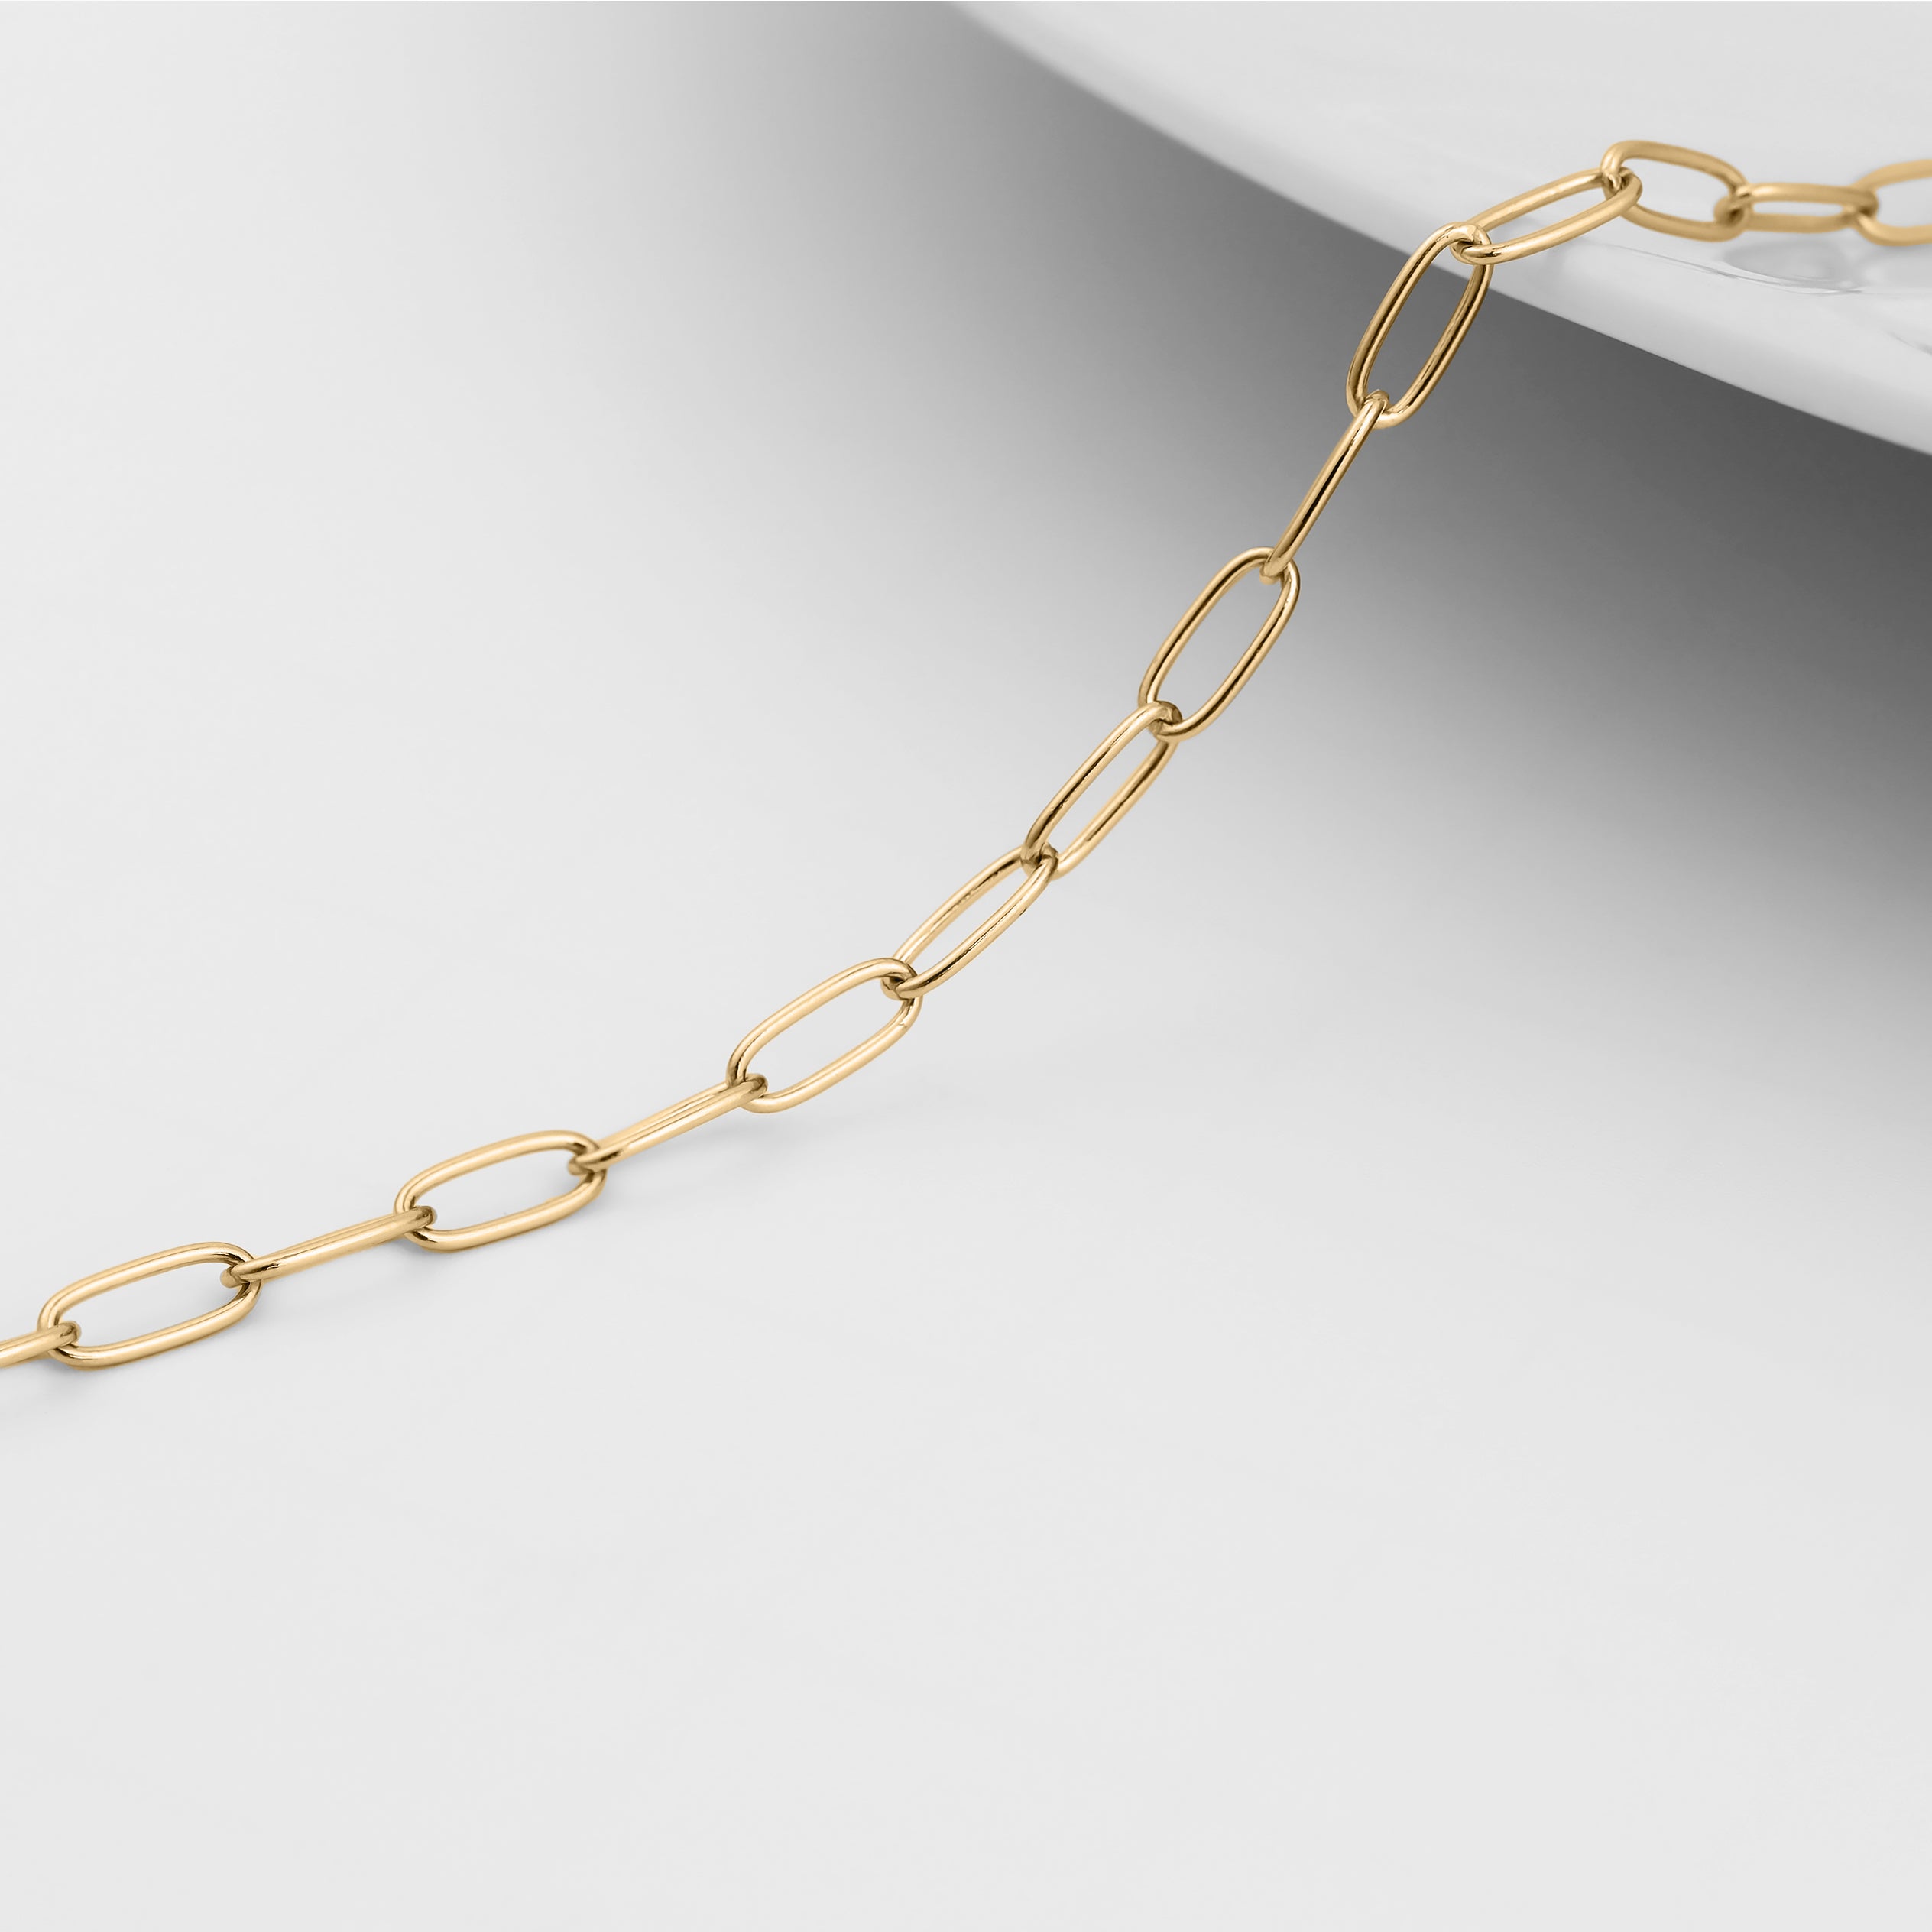 2.0 mm Fine Paperclip Chain 14K Solid Gold Permanent Jewelry Link - By